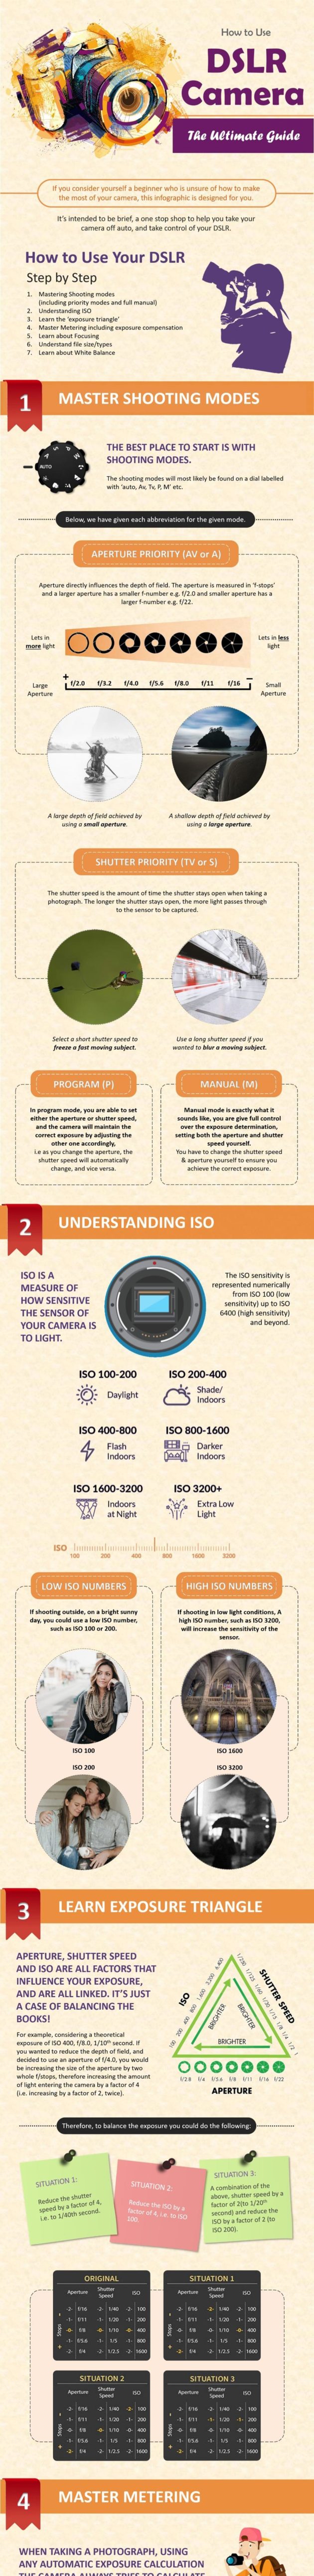 How to Use a DSLR Camera The Ultimate Guide (Infographic)